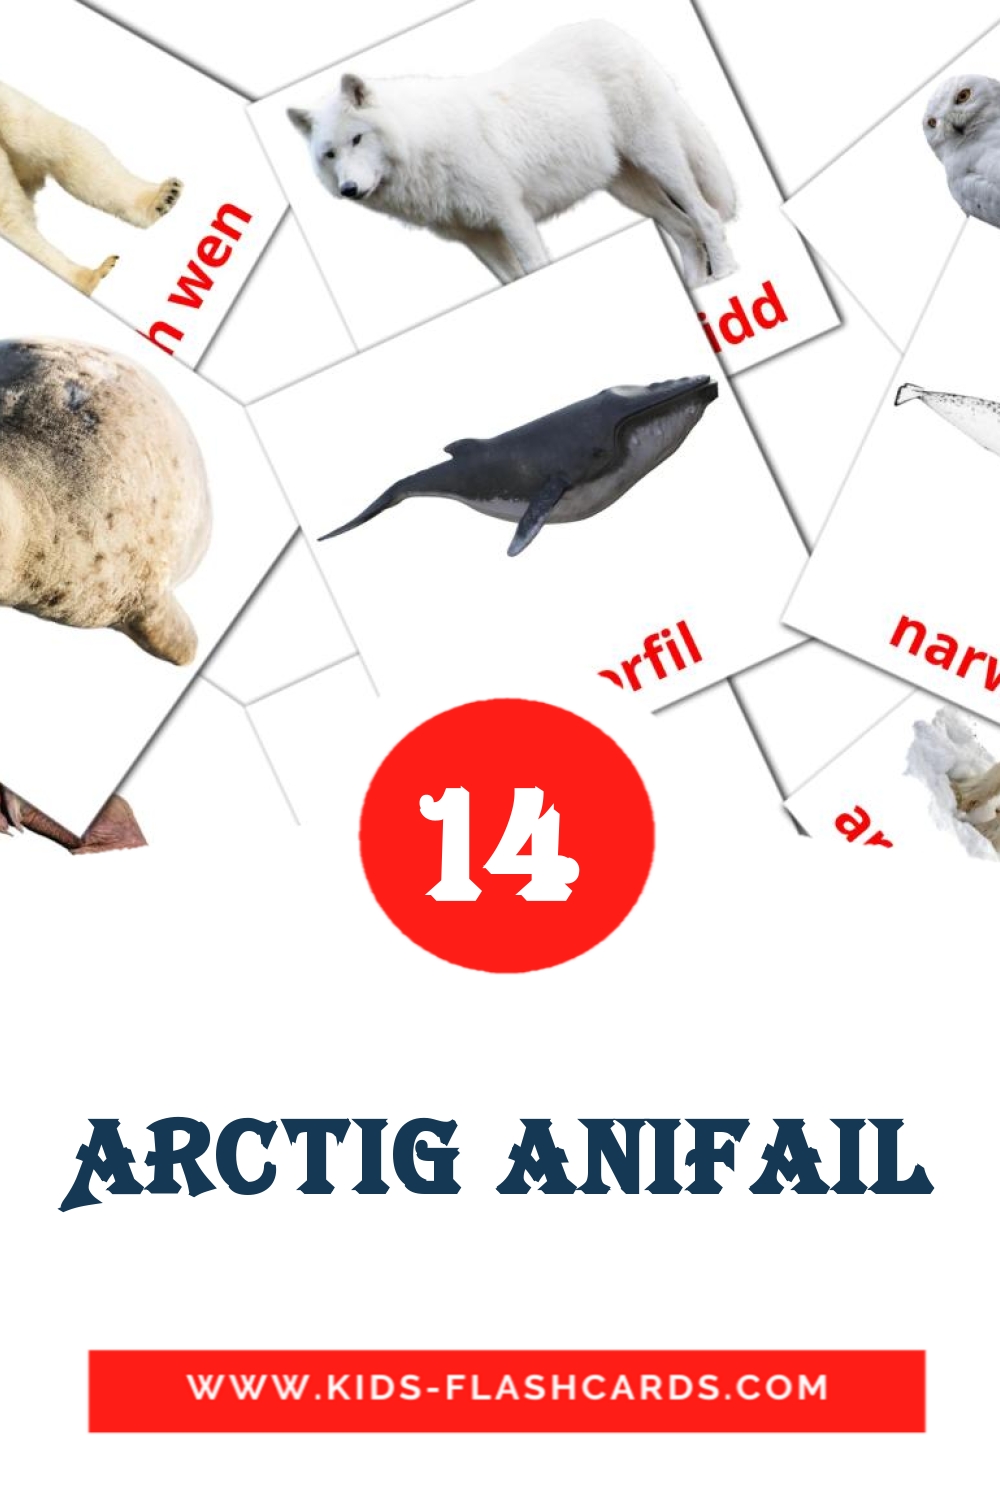 14 Arctig anifail Picture Cards for Kindergarden in welsh